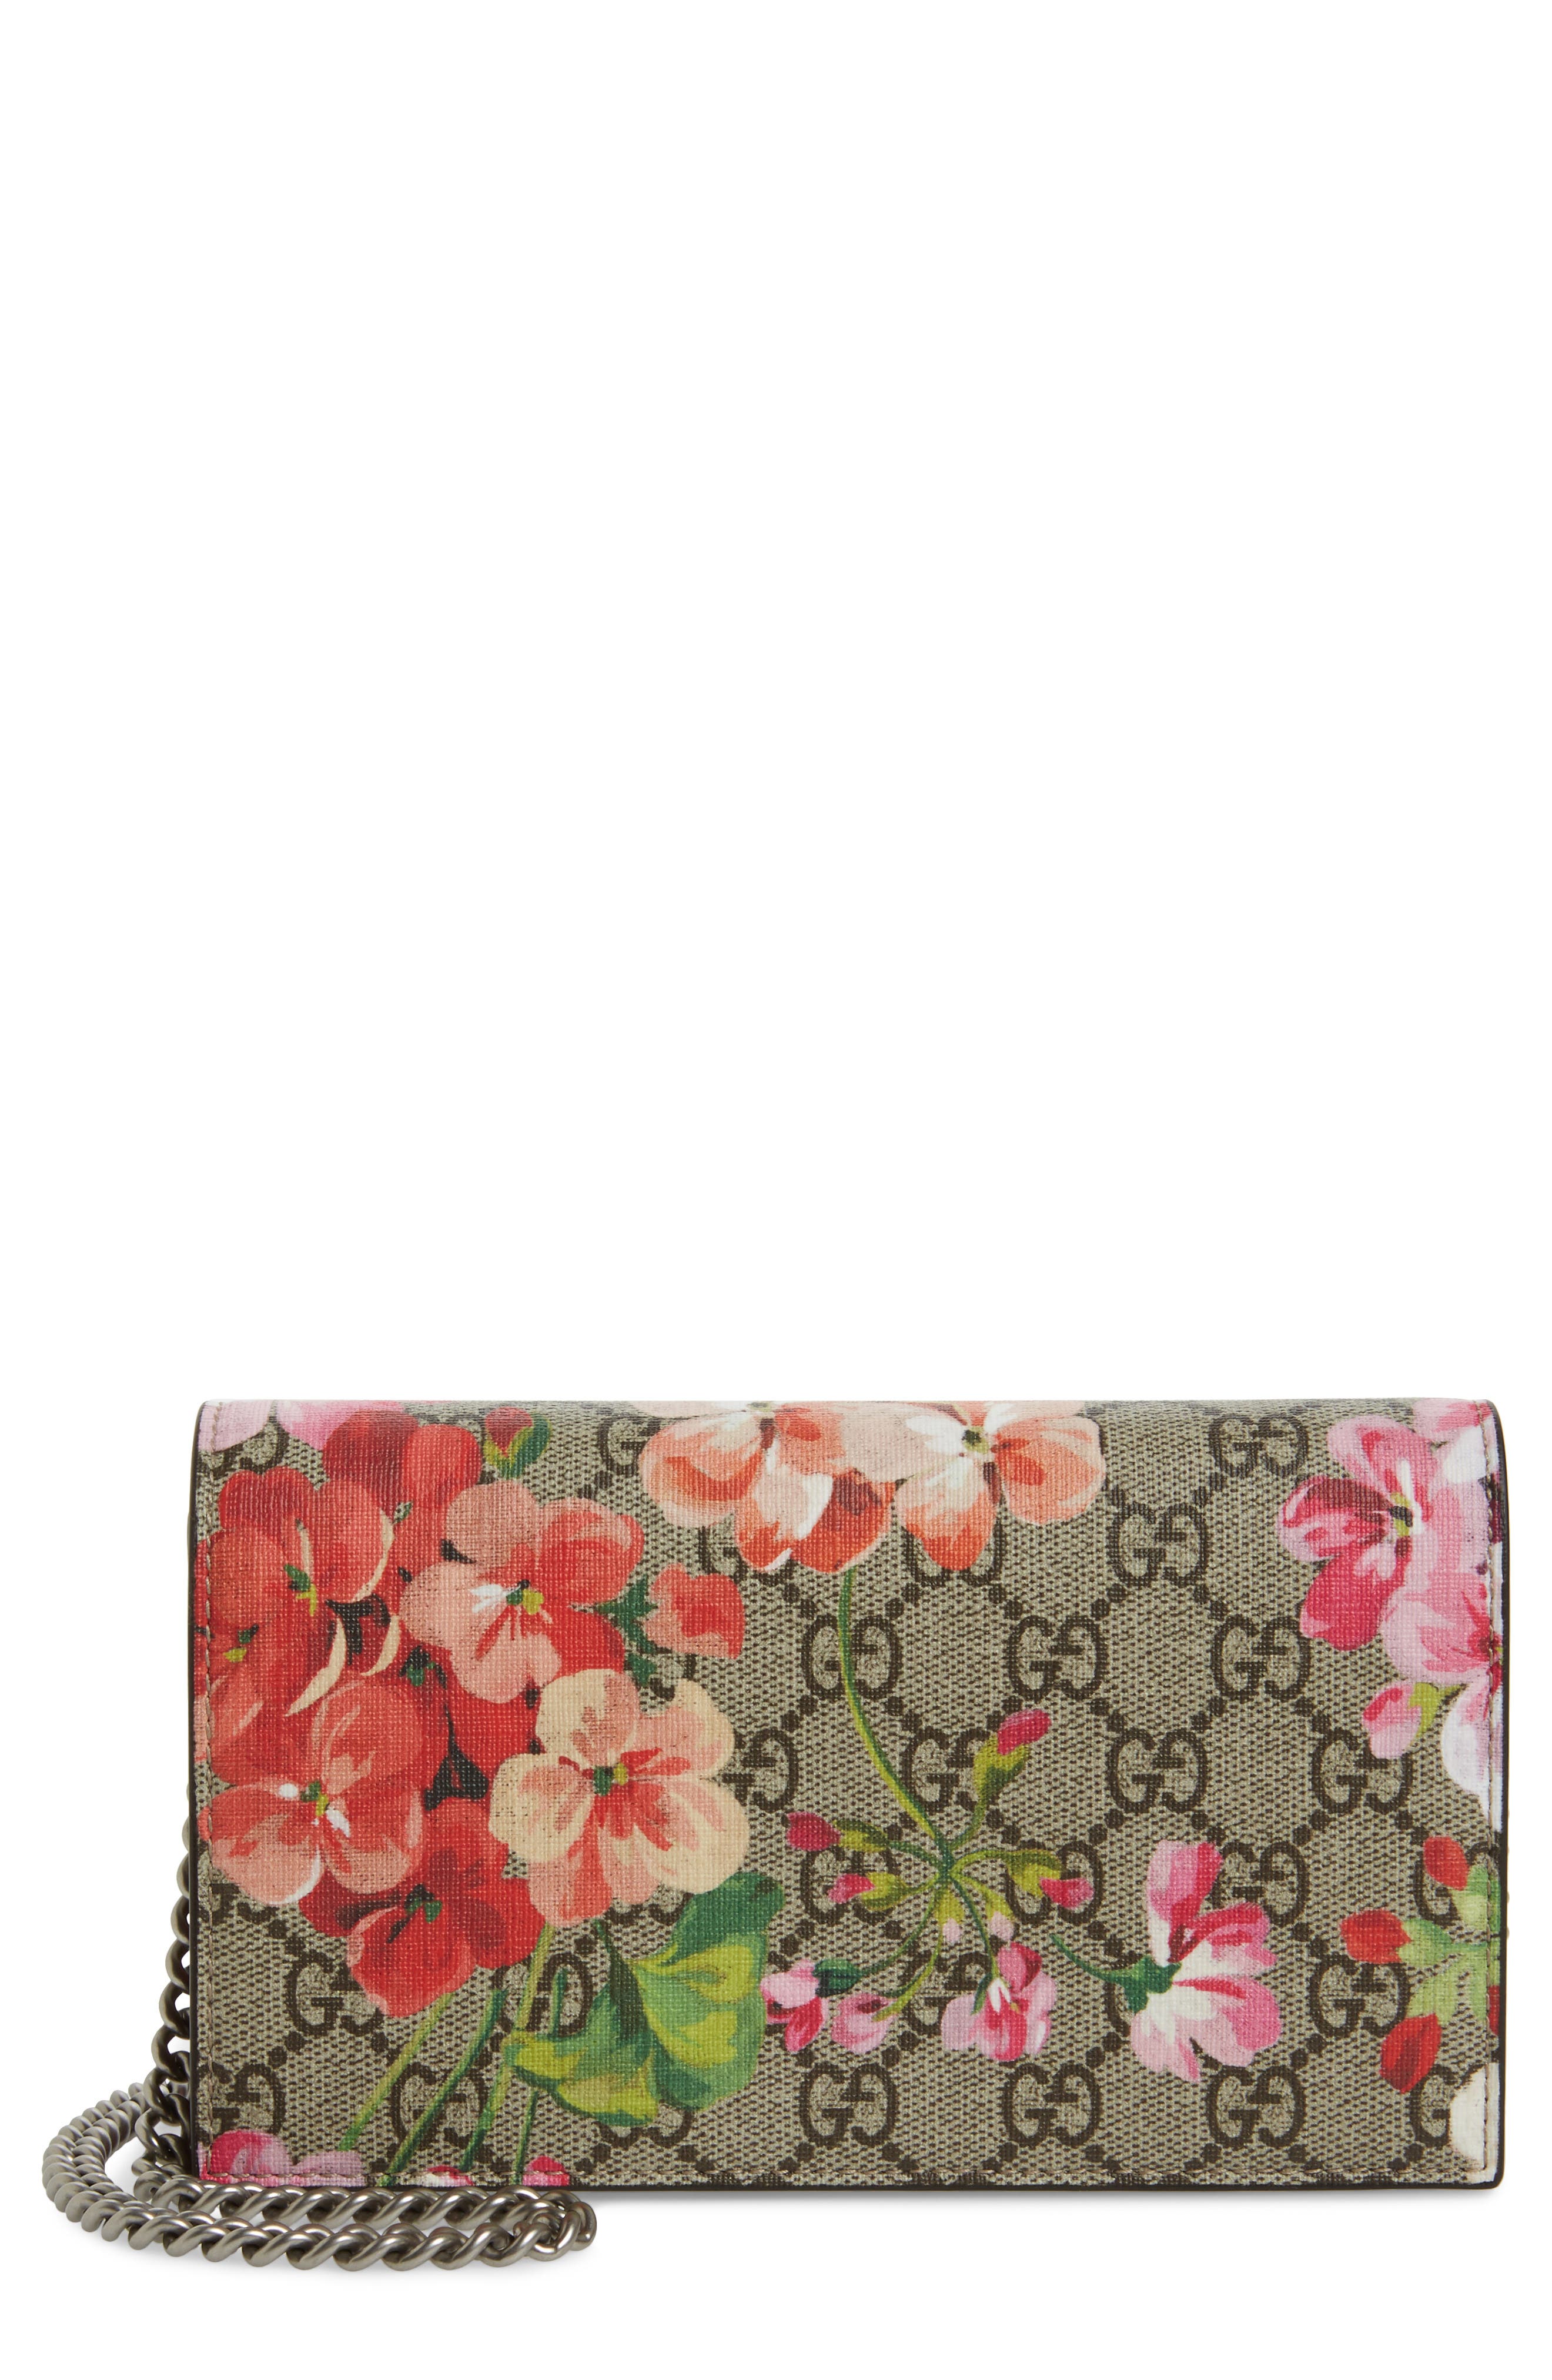 gg blooms supreme chain wallet